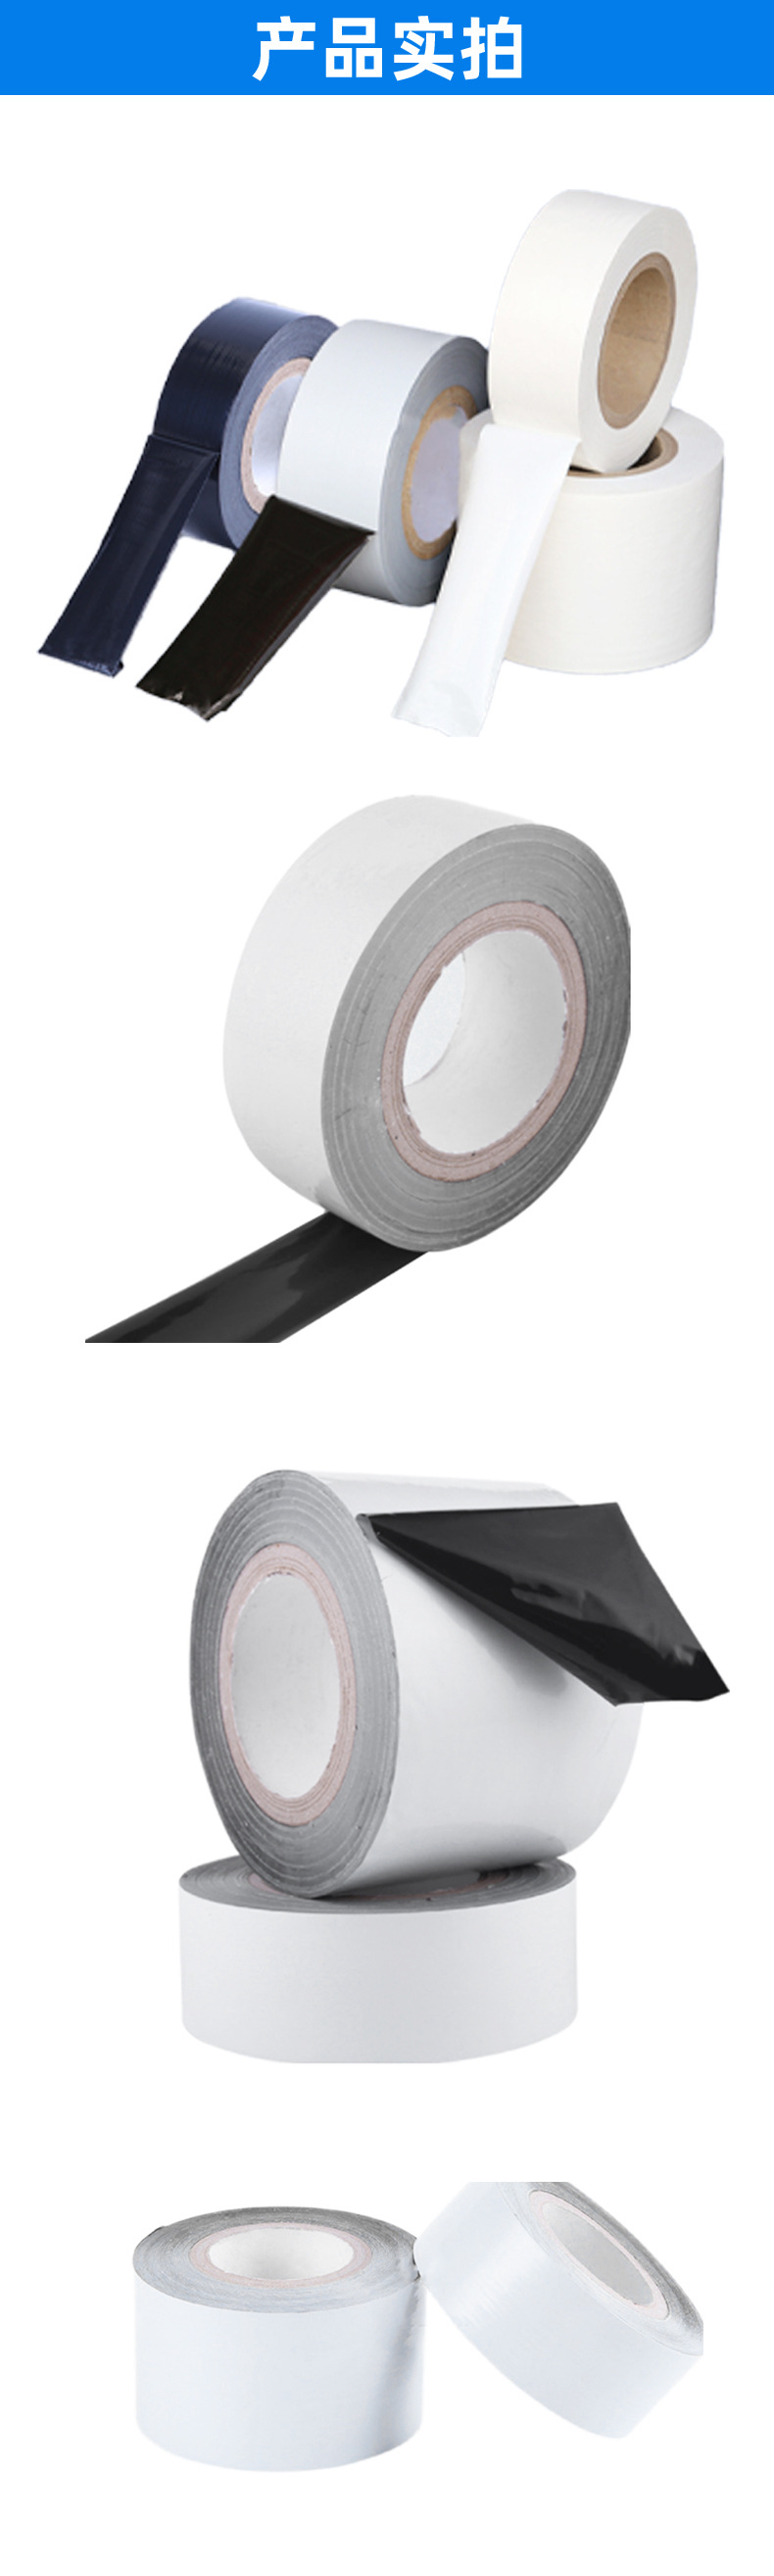 Supply of PE black and white protective film for aluminum alloy doors and windows, support for printing aluminum materials, pPE protective film packaging, printing tape, double-sided tape, automotive protective film